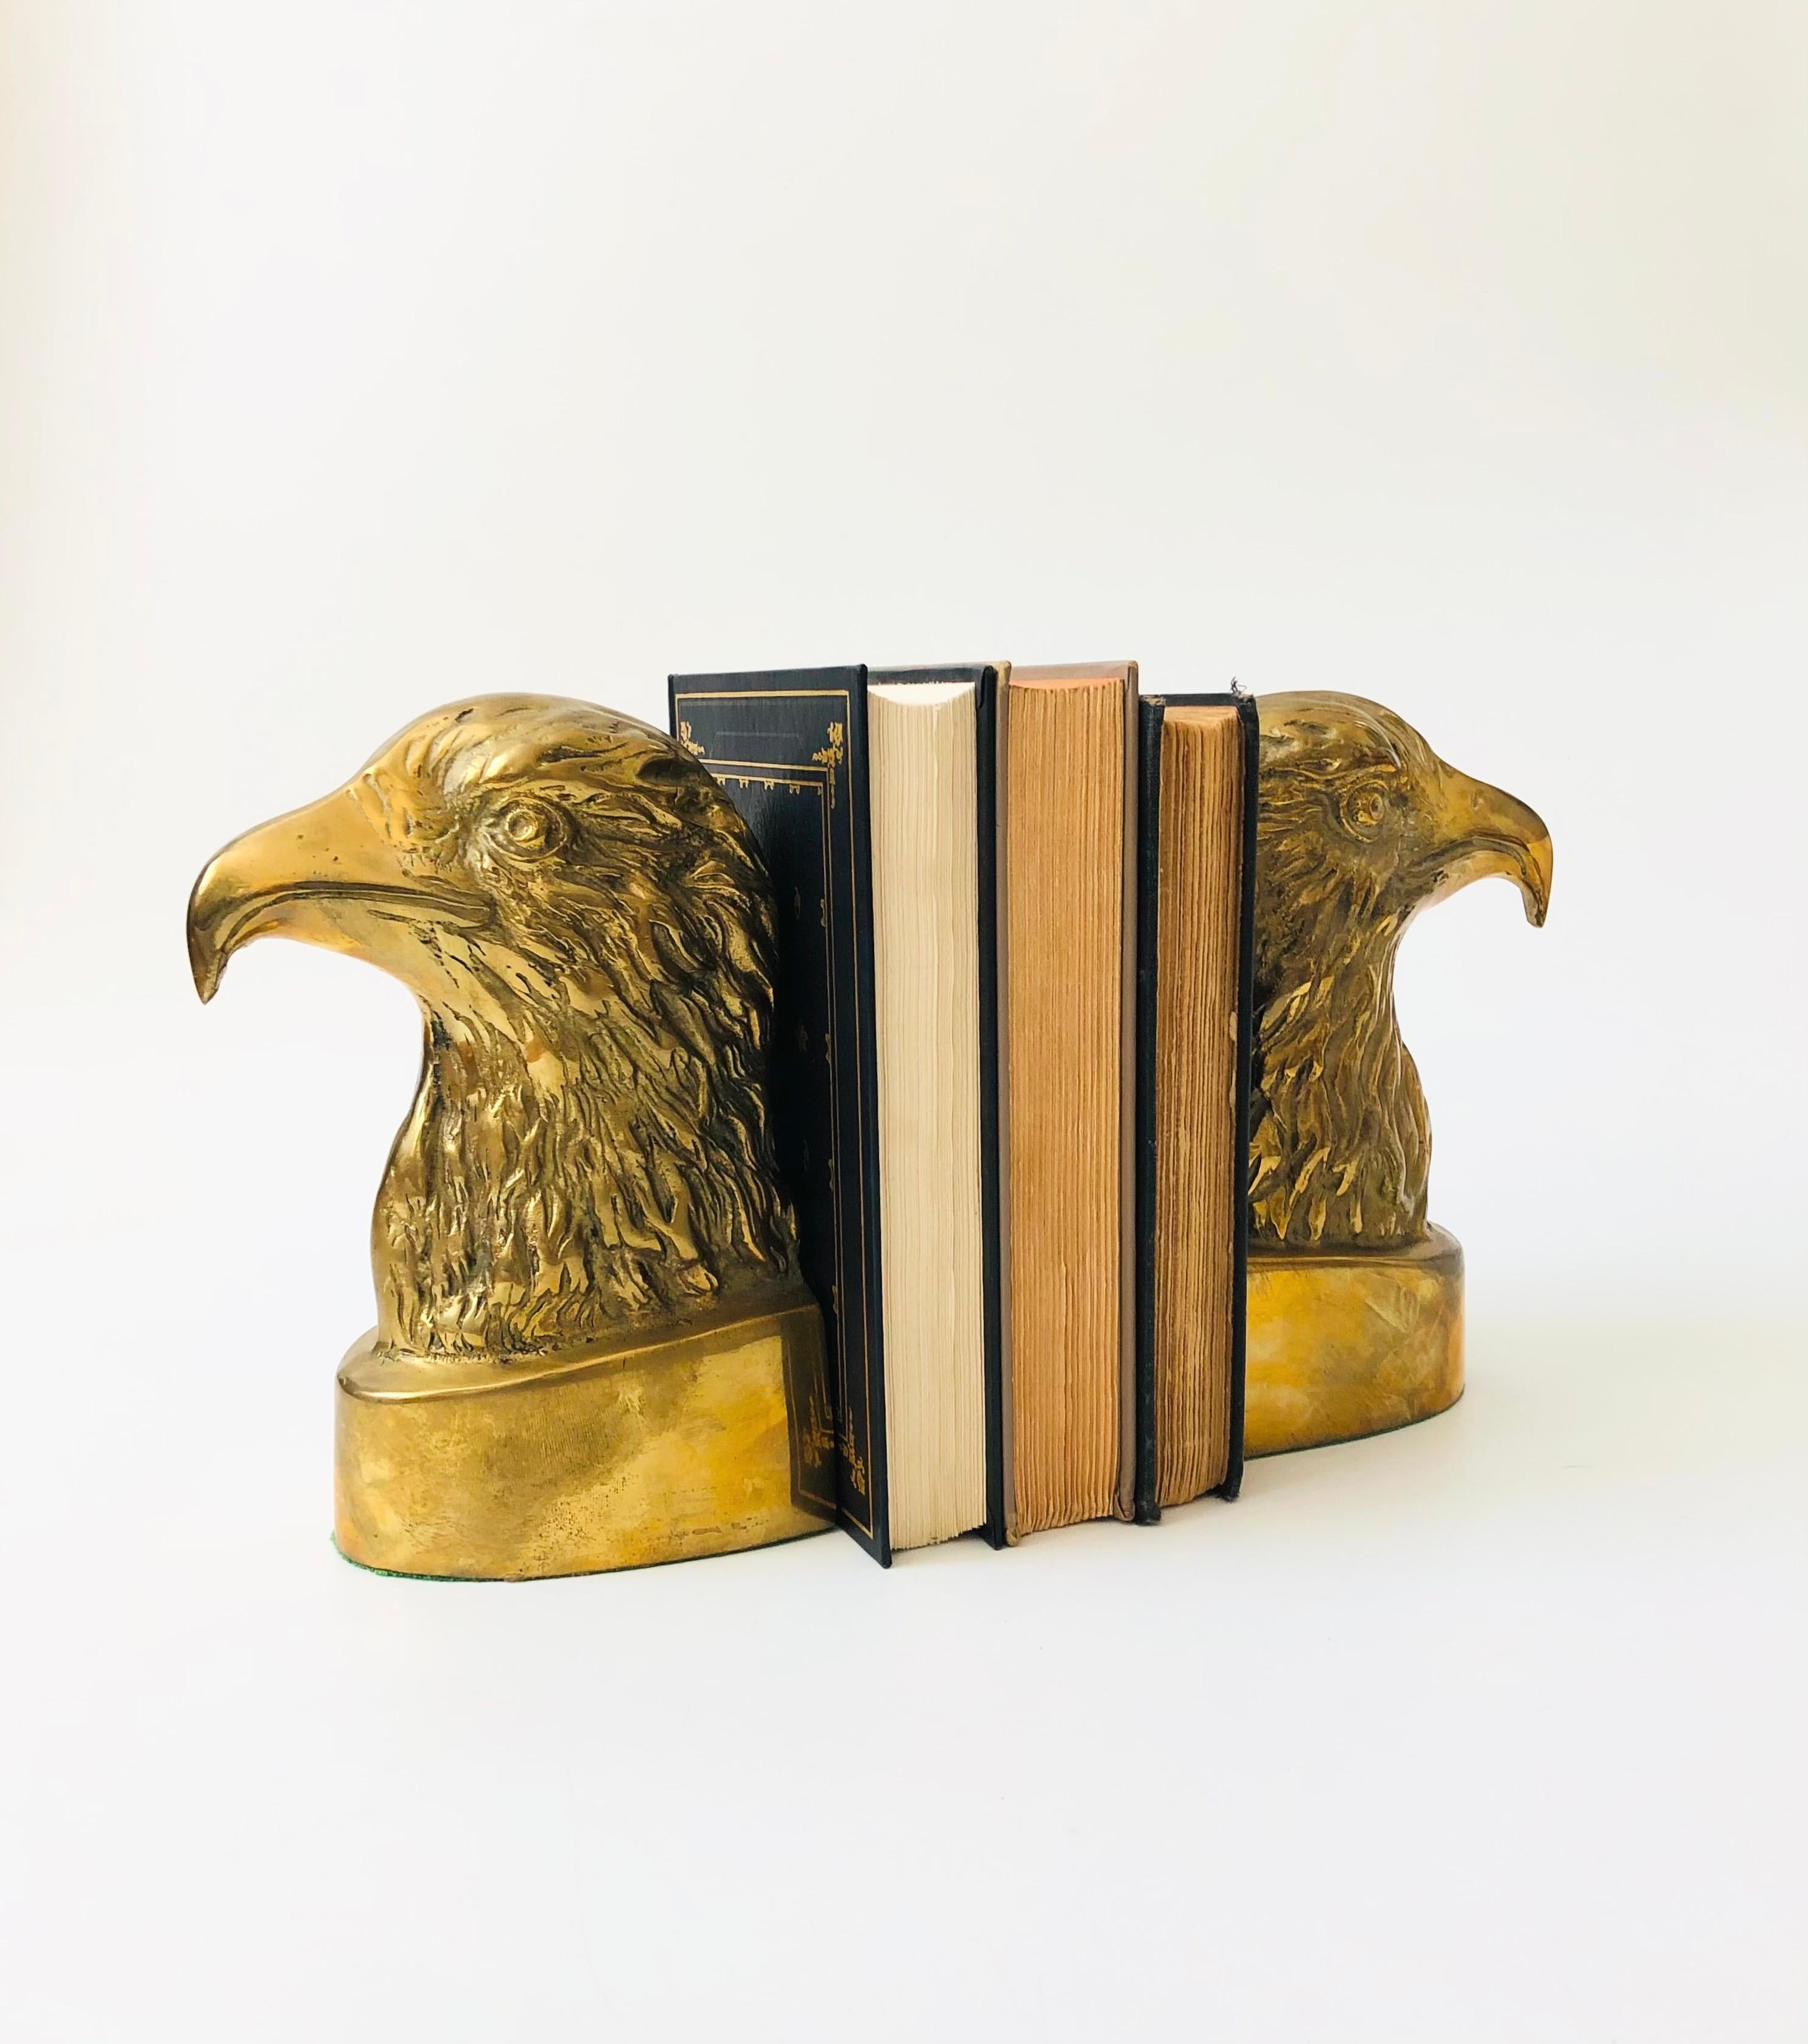 A wonderful pair of vintage brass bookends in the shape of eagles. Nice heavy weight. Beautiful details formed into the brass. Made in Korea.

